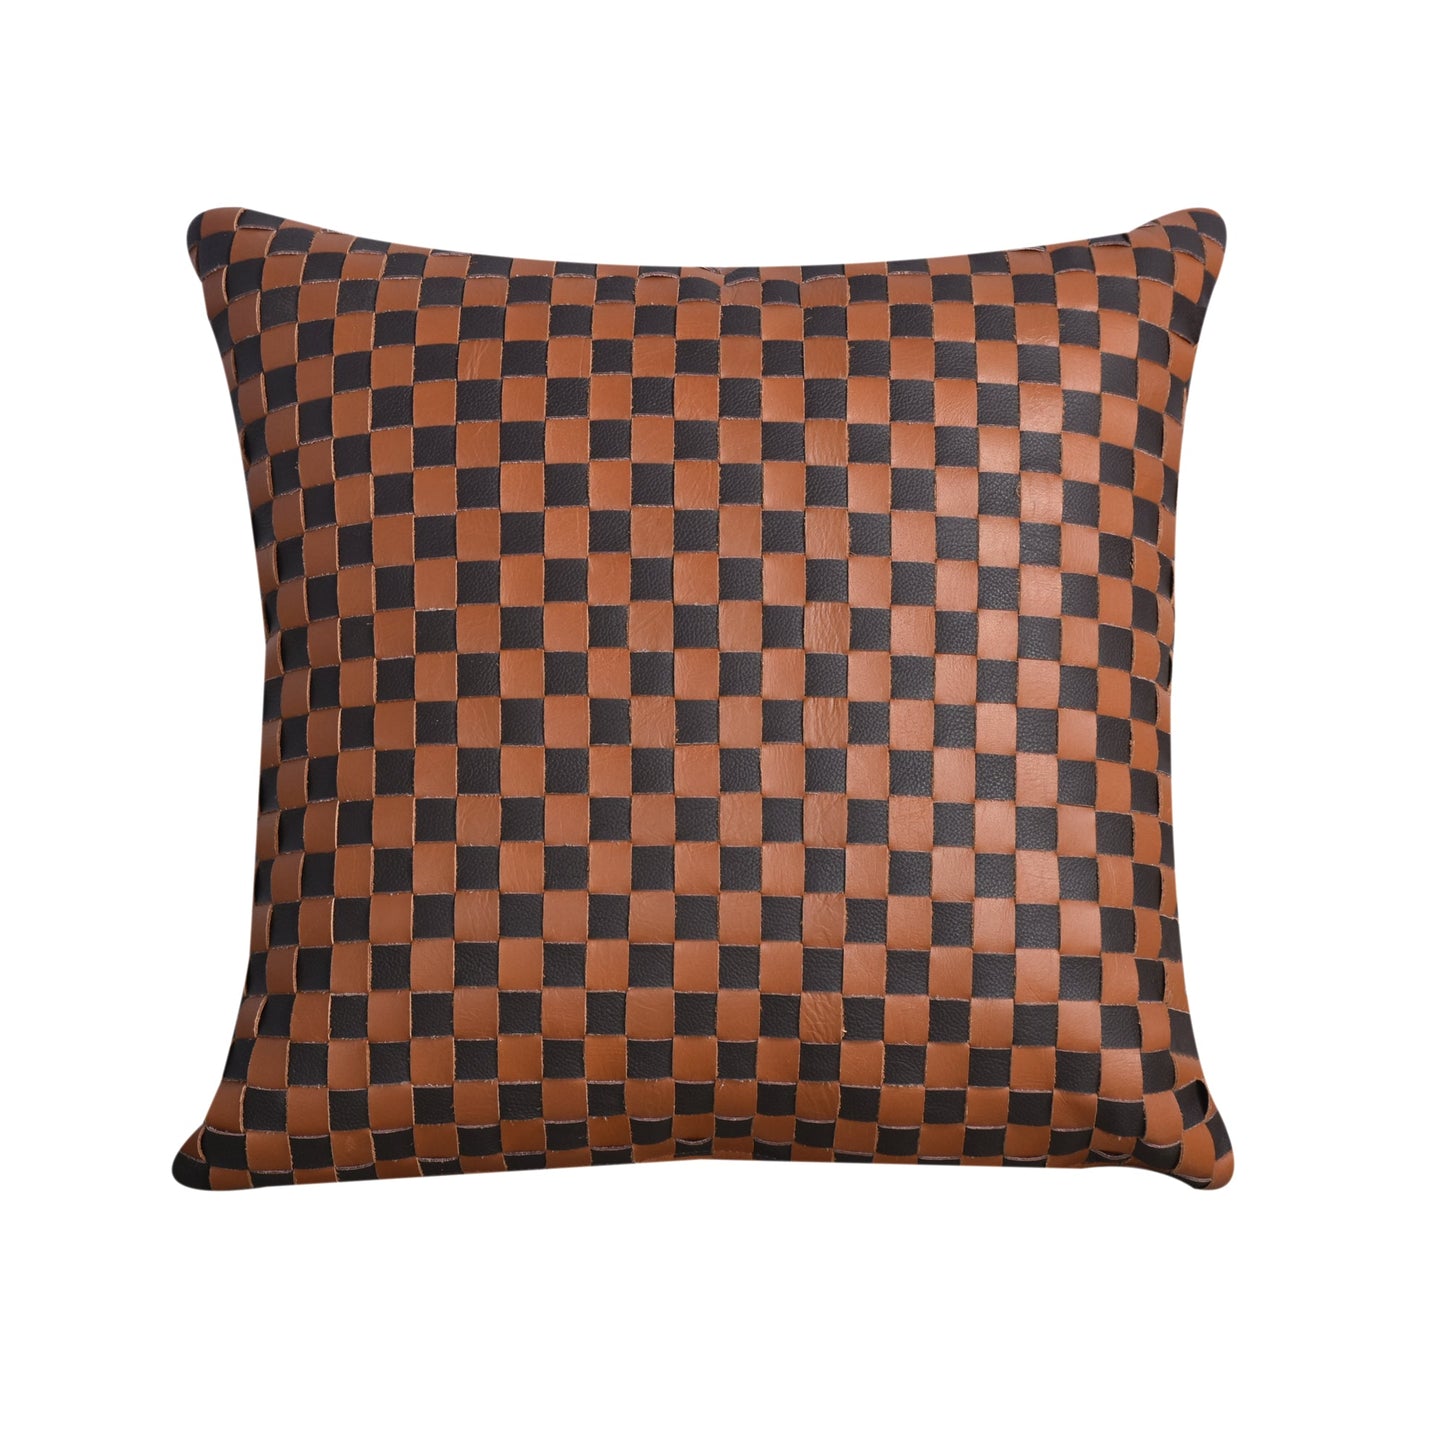 LOMBARDY CUSHION - LEATHER